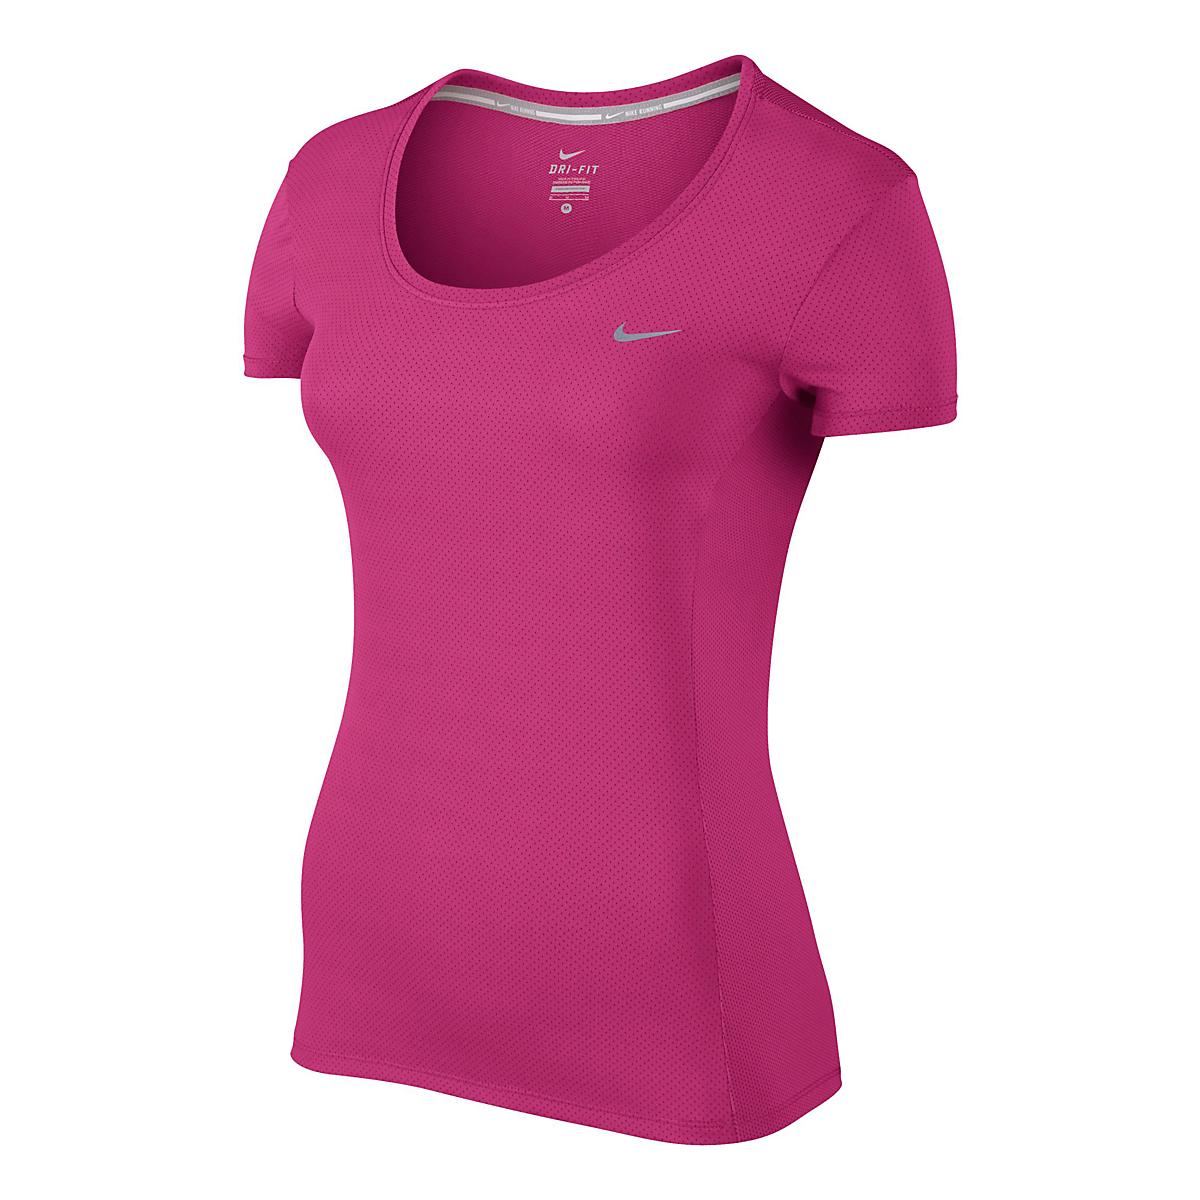 Womens Nike Dri-Fit Contour Short Sleeve Technical Tops at Road Runner ...